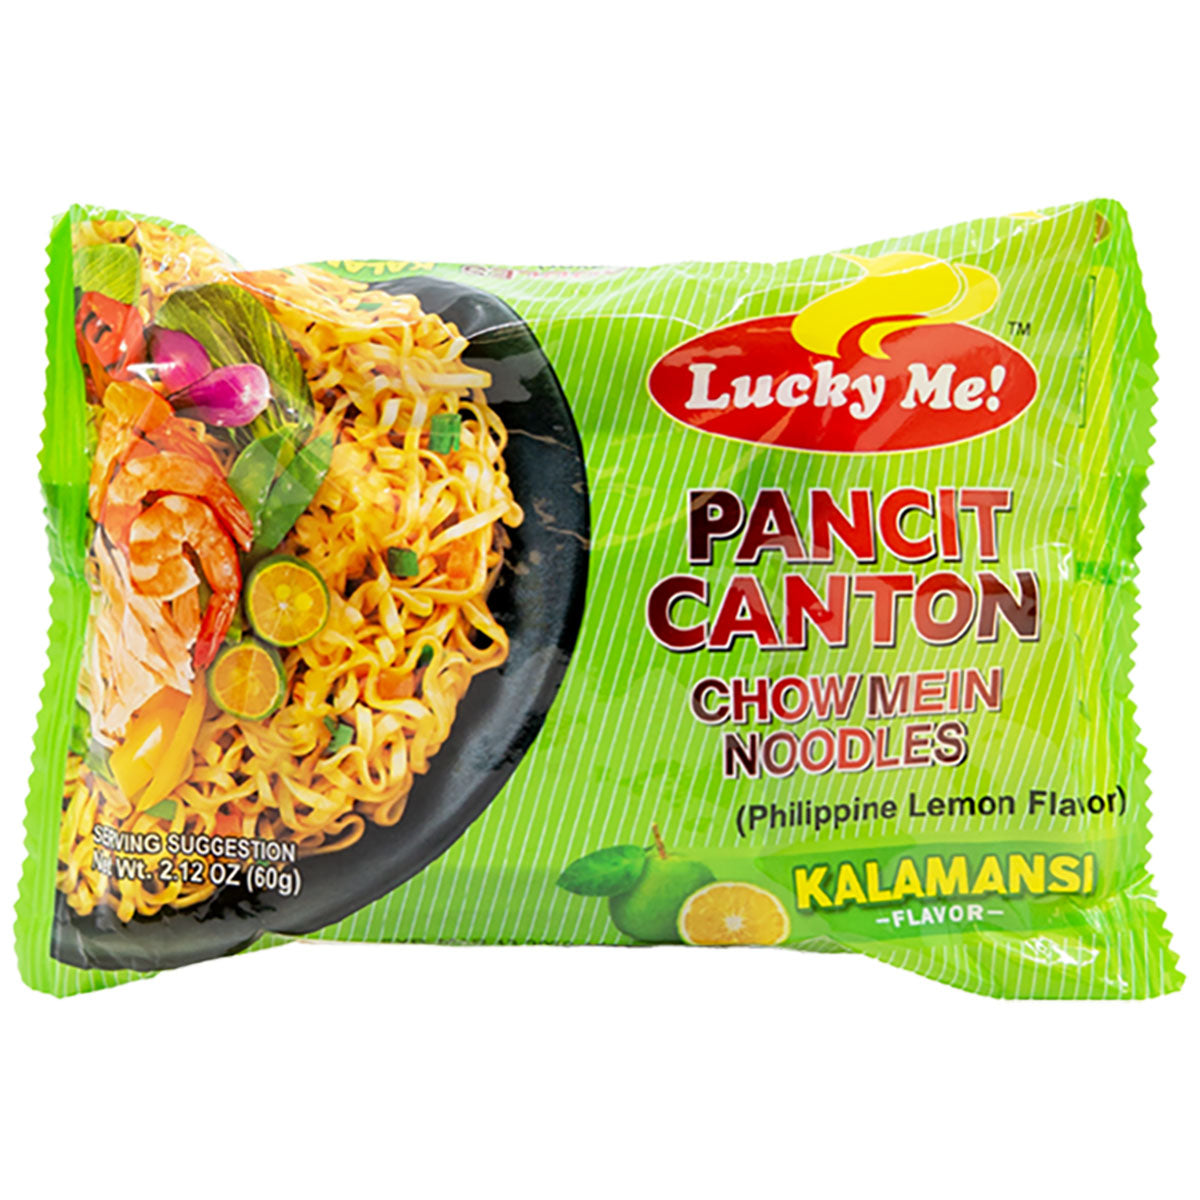 Pancit Canton Gifts & Merchandise for Sale